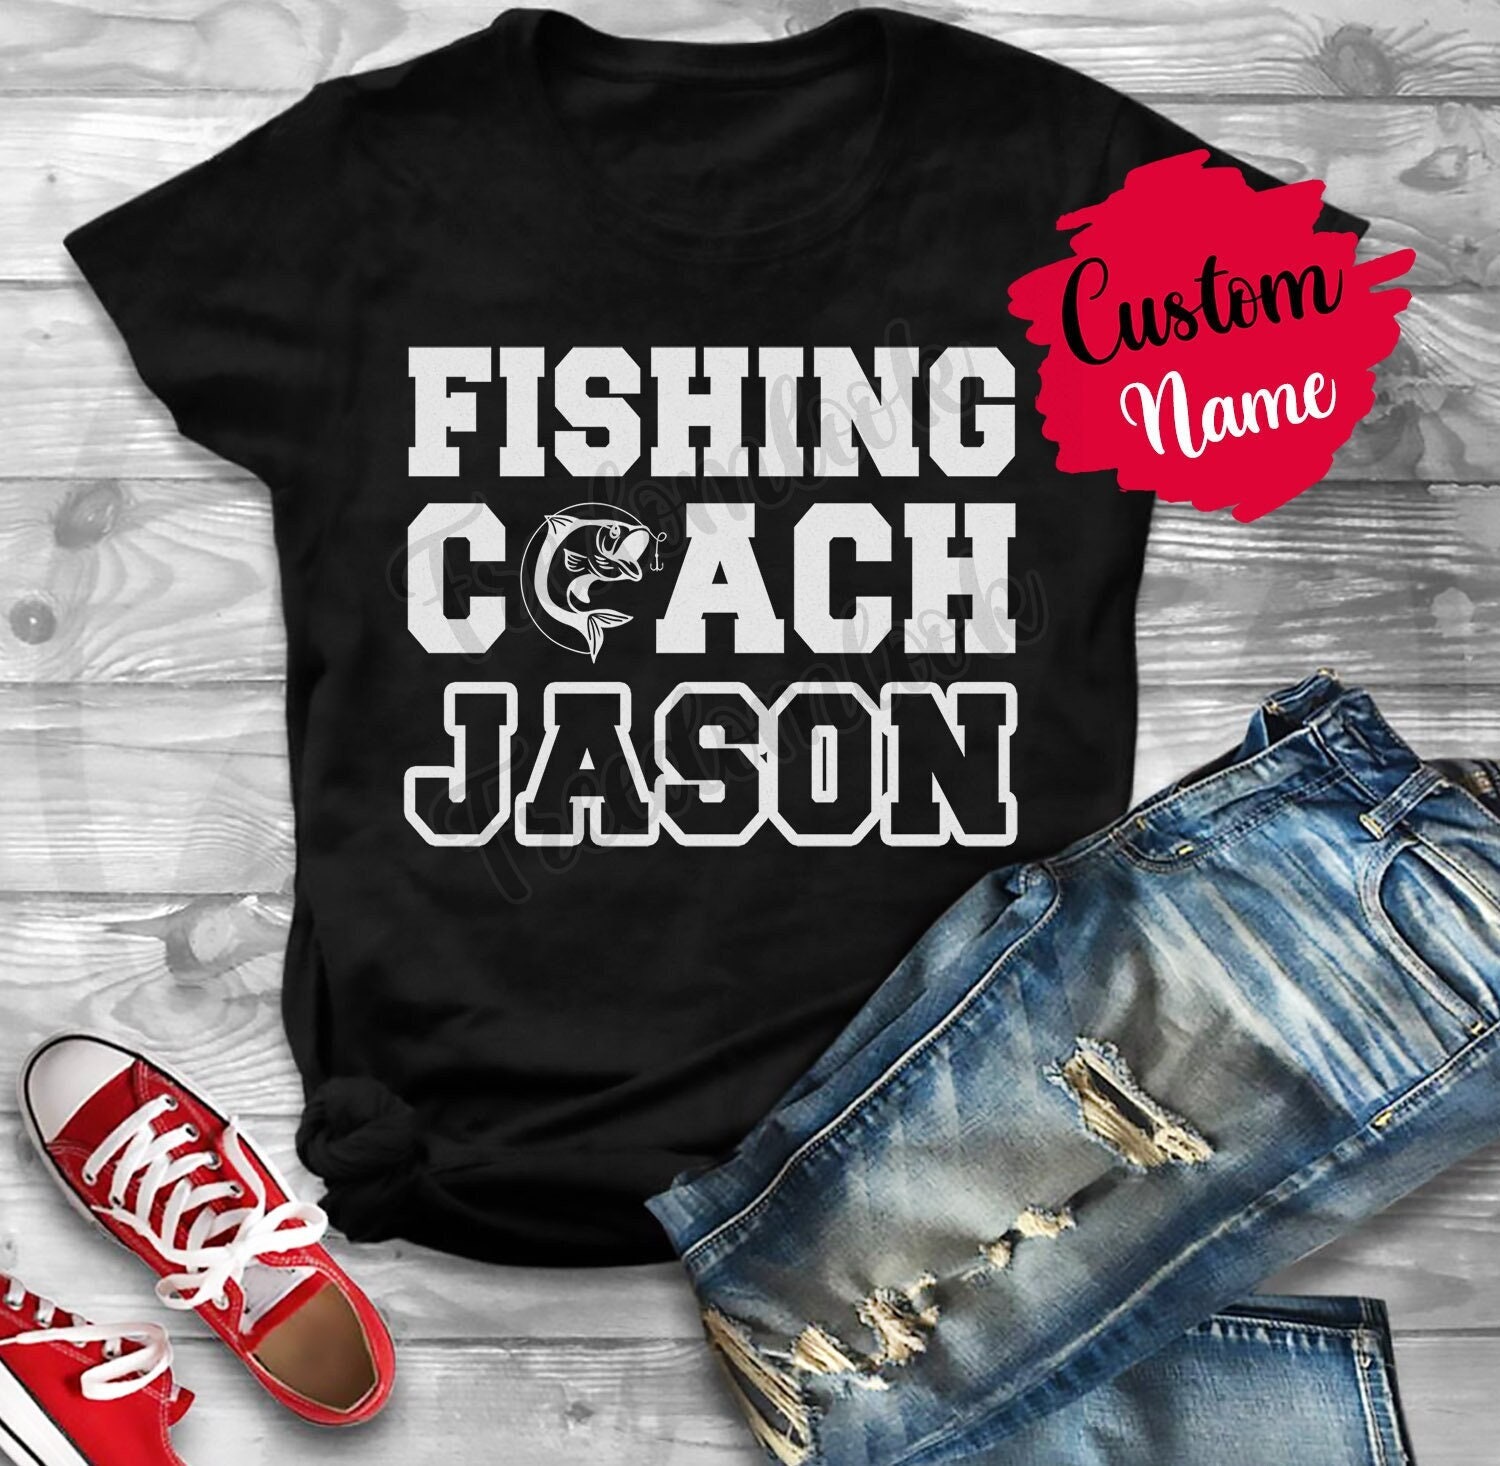 3. Customizing Your Fishing T-Shirt to Reflect Your Coach's Style